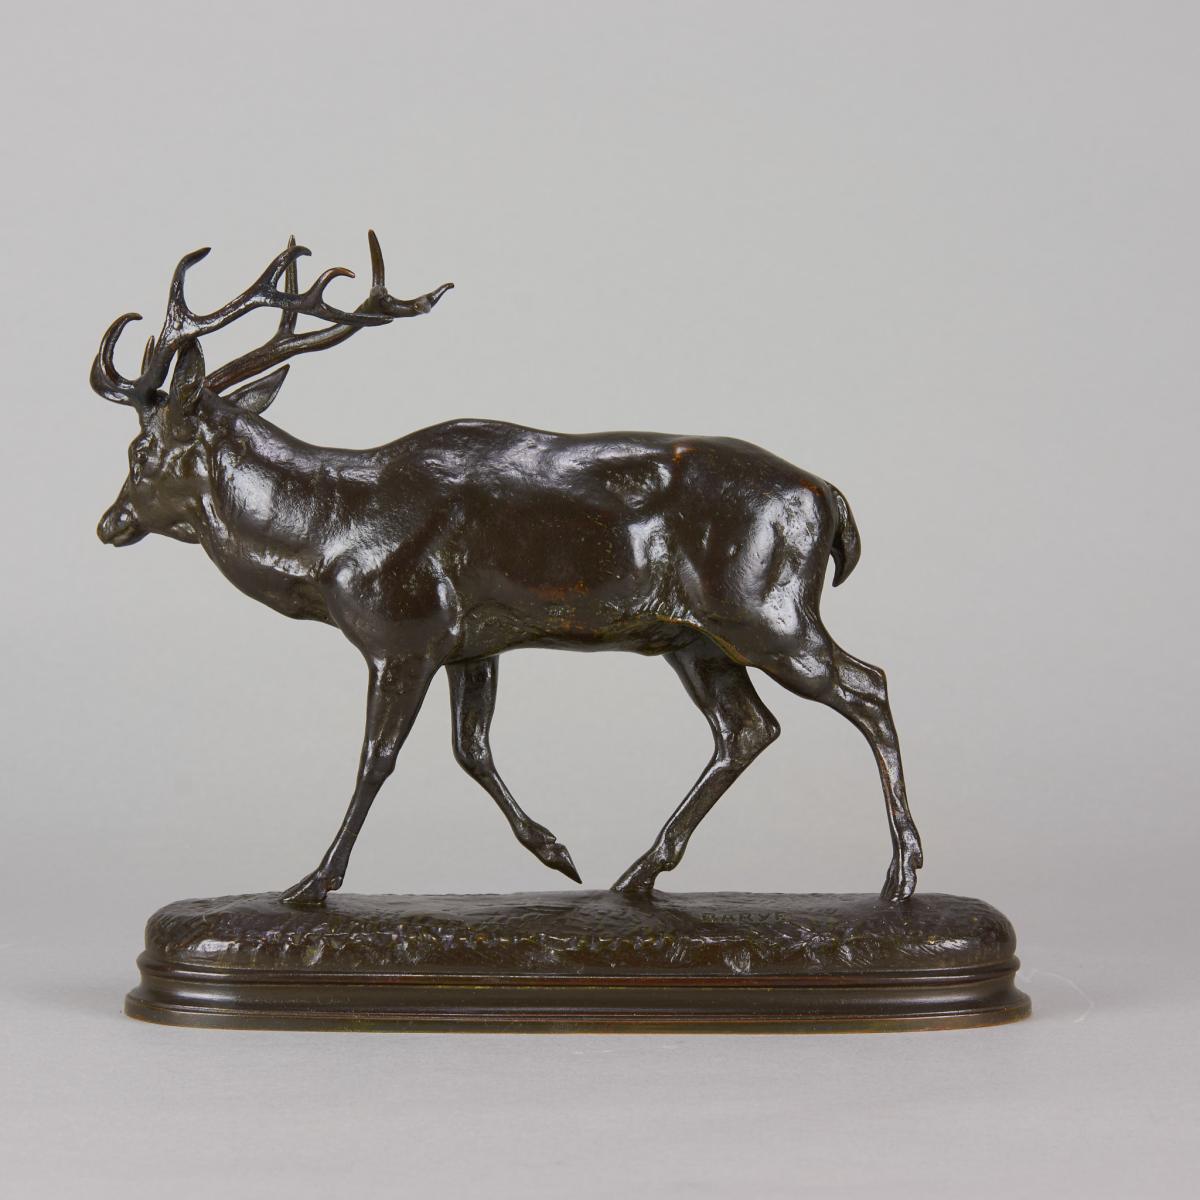 19th Century Animalier Bronze entitled "Cerf qui Marche" by A L Barye